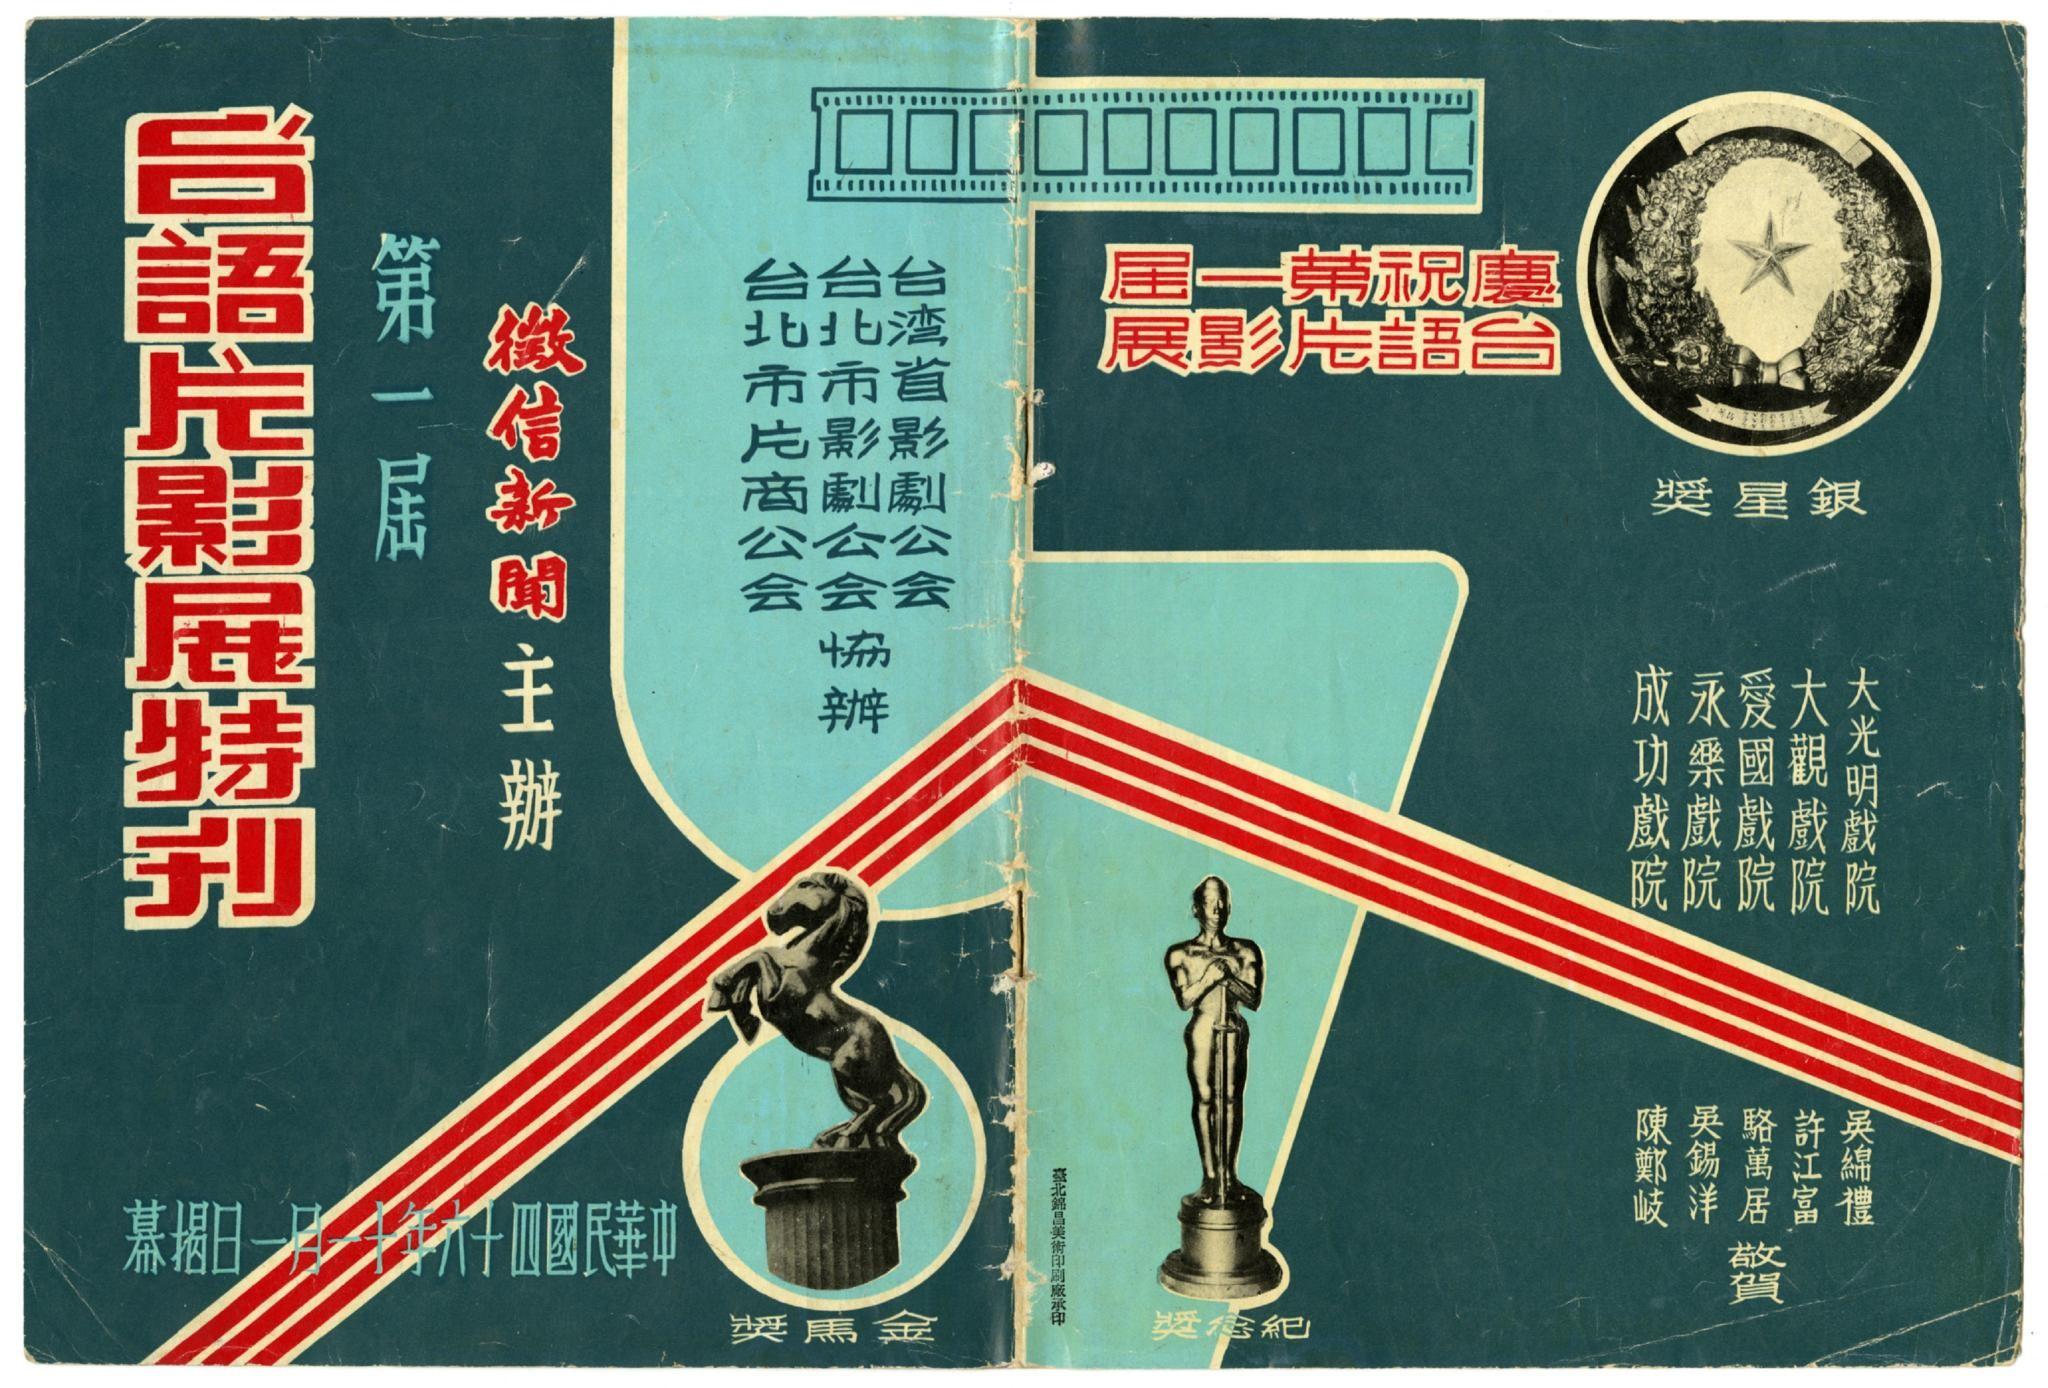 The awards show program for the first (and last) Taiwanese Language Film Festival in 1957. Image courtesy of Taiwan Film Institute.